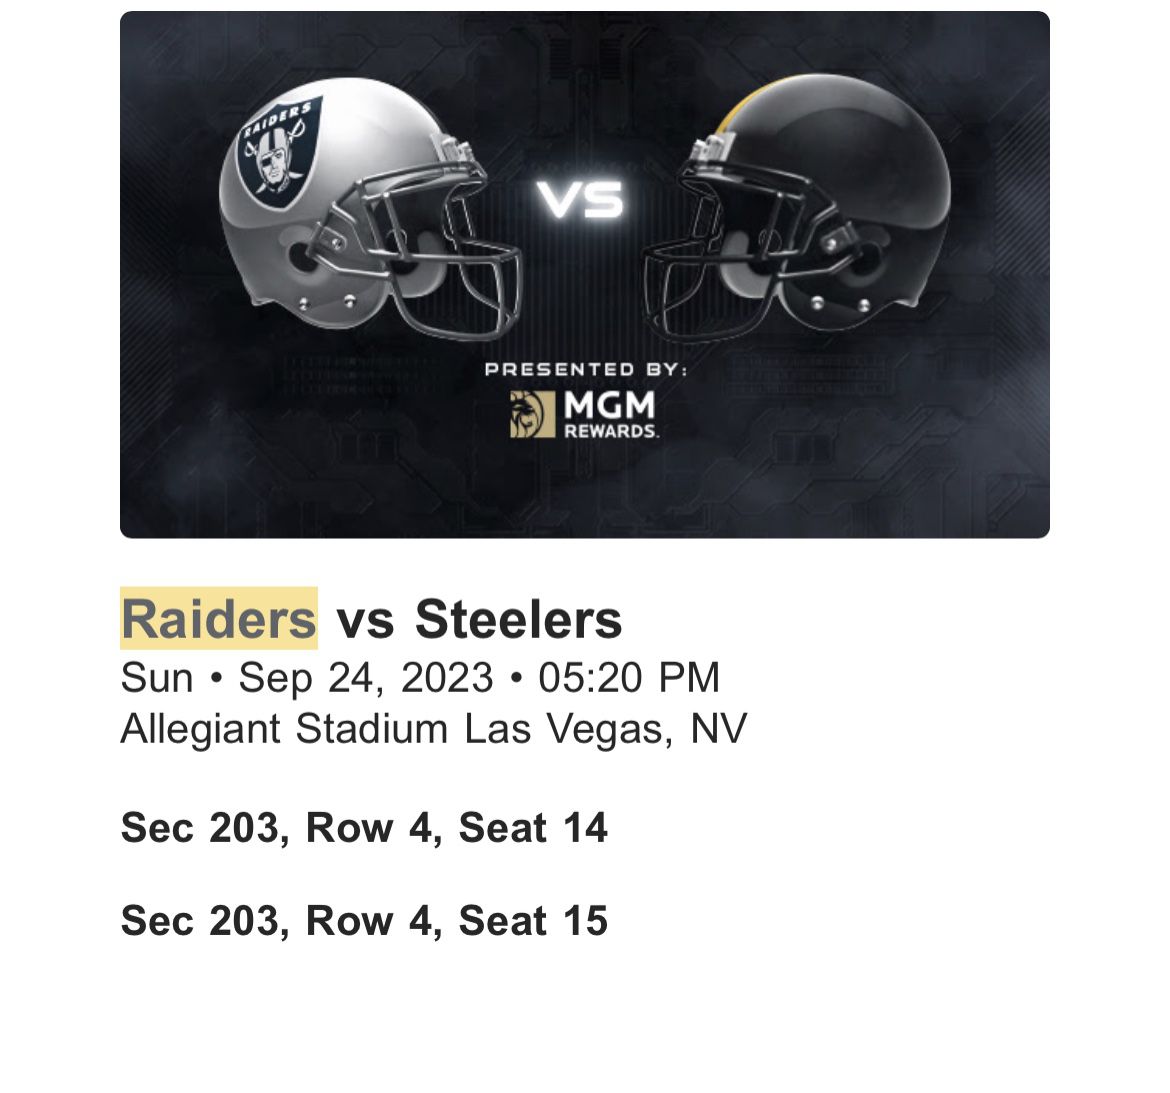 tickets to steelers raiders game